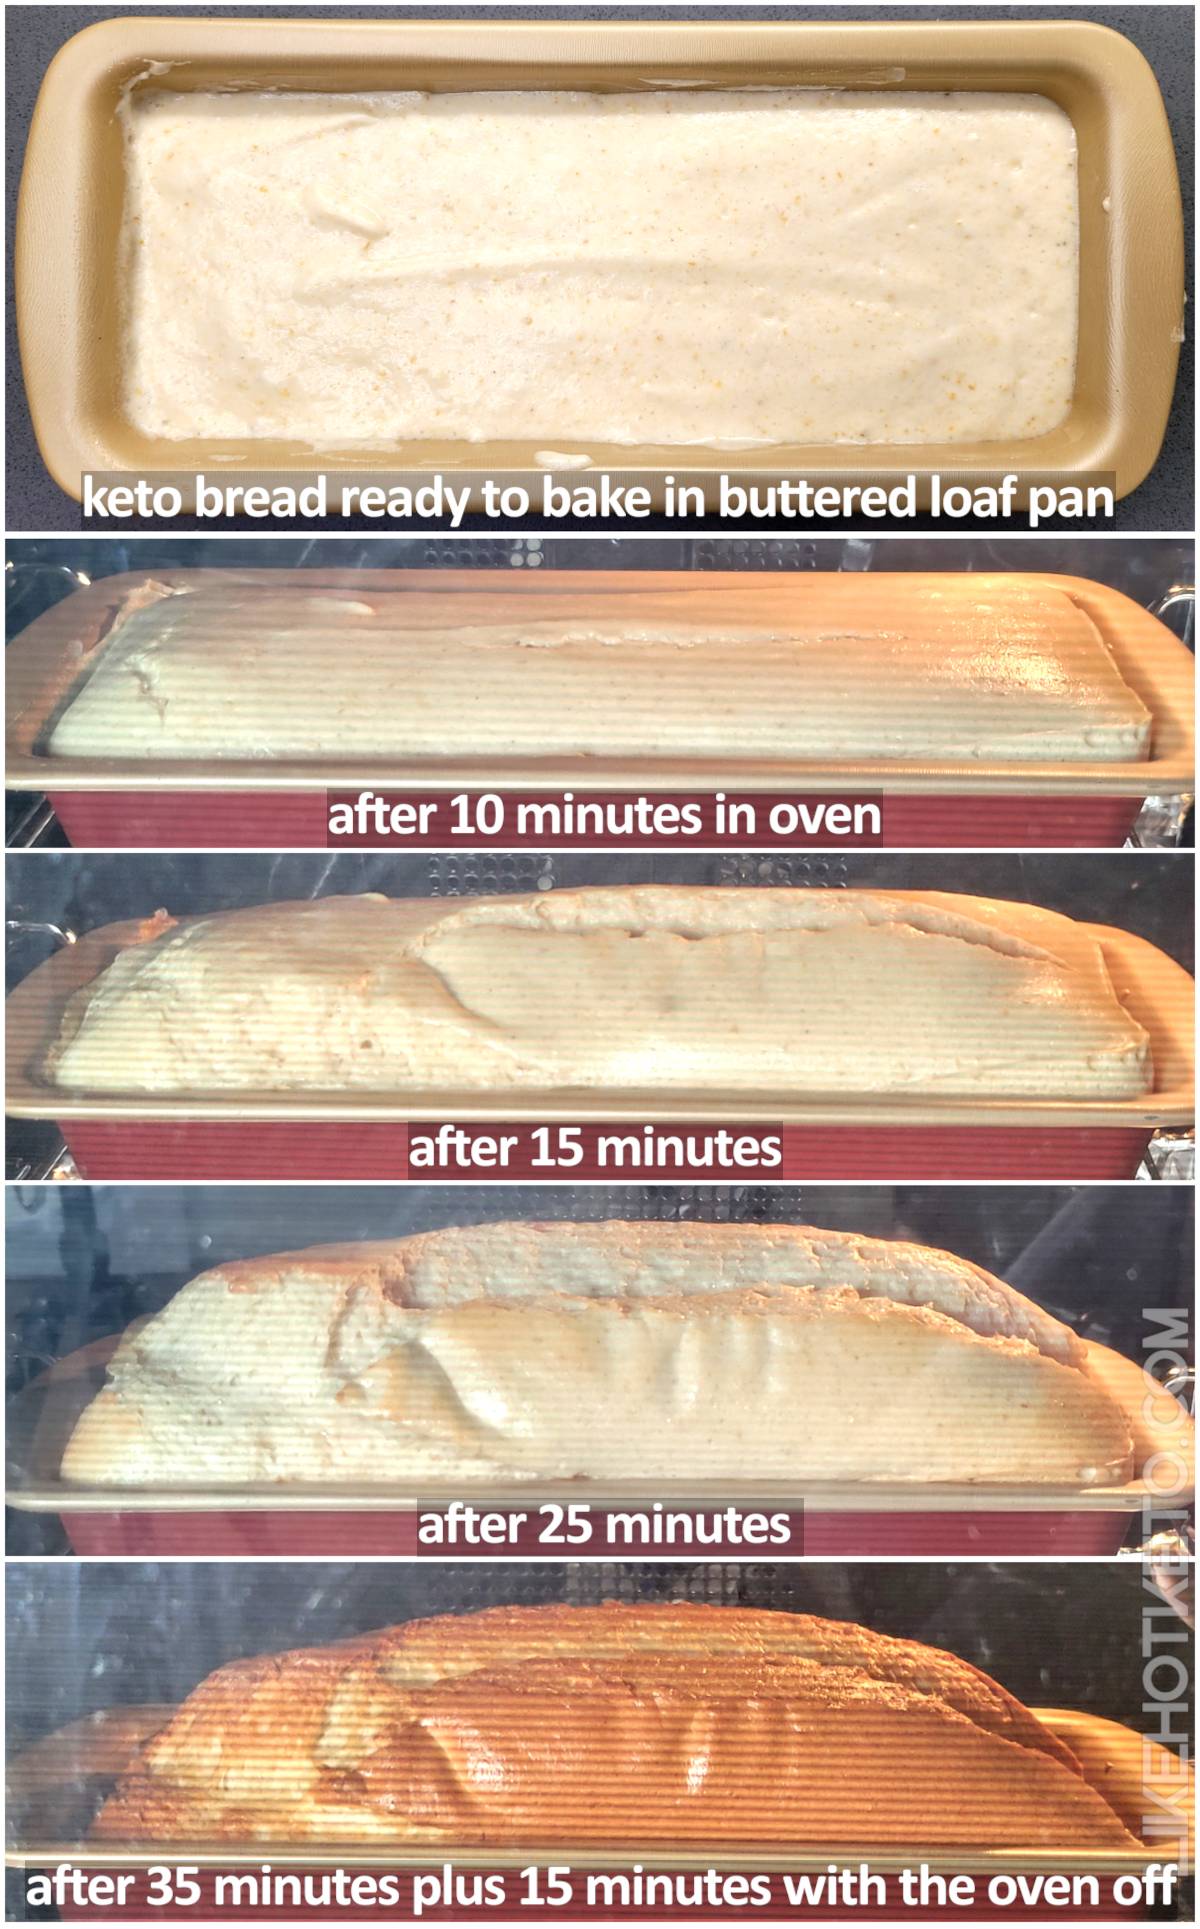 The keto egg white bread batter inside the loaf pan, then inside the oven showing it growing as it bakes.